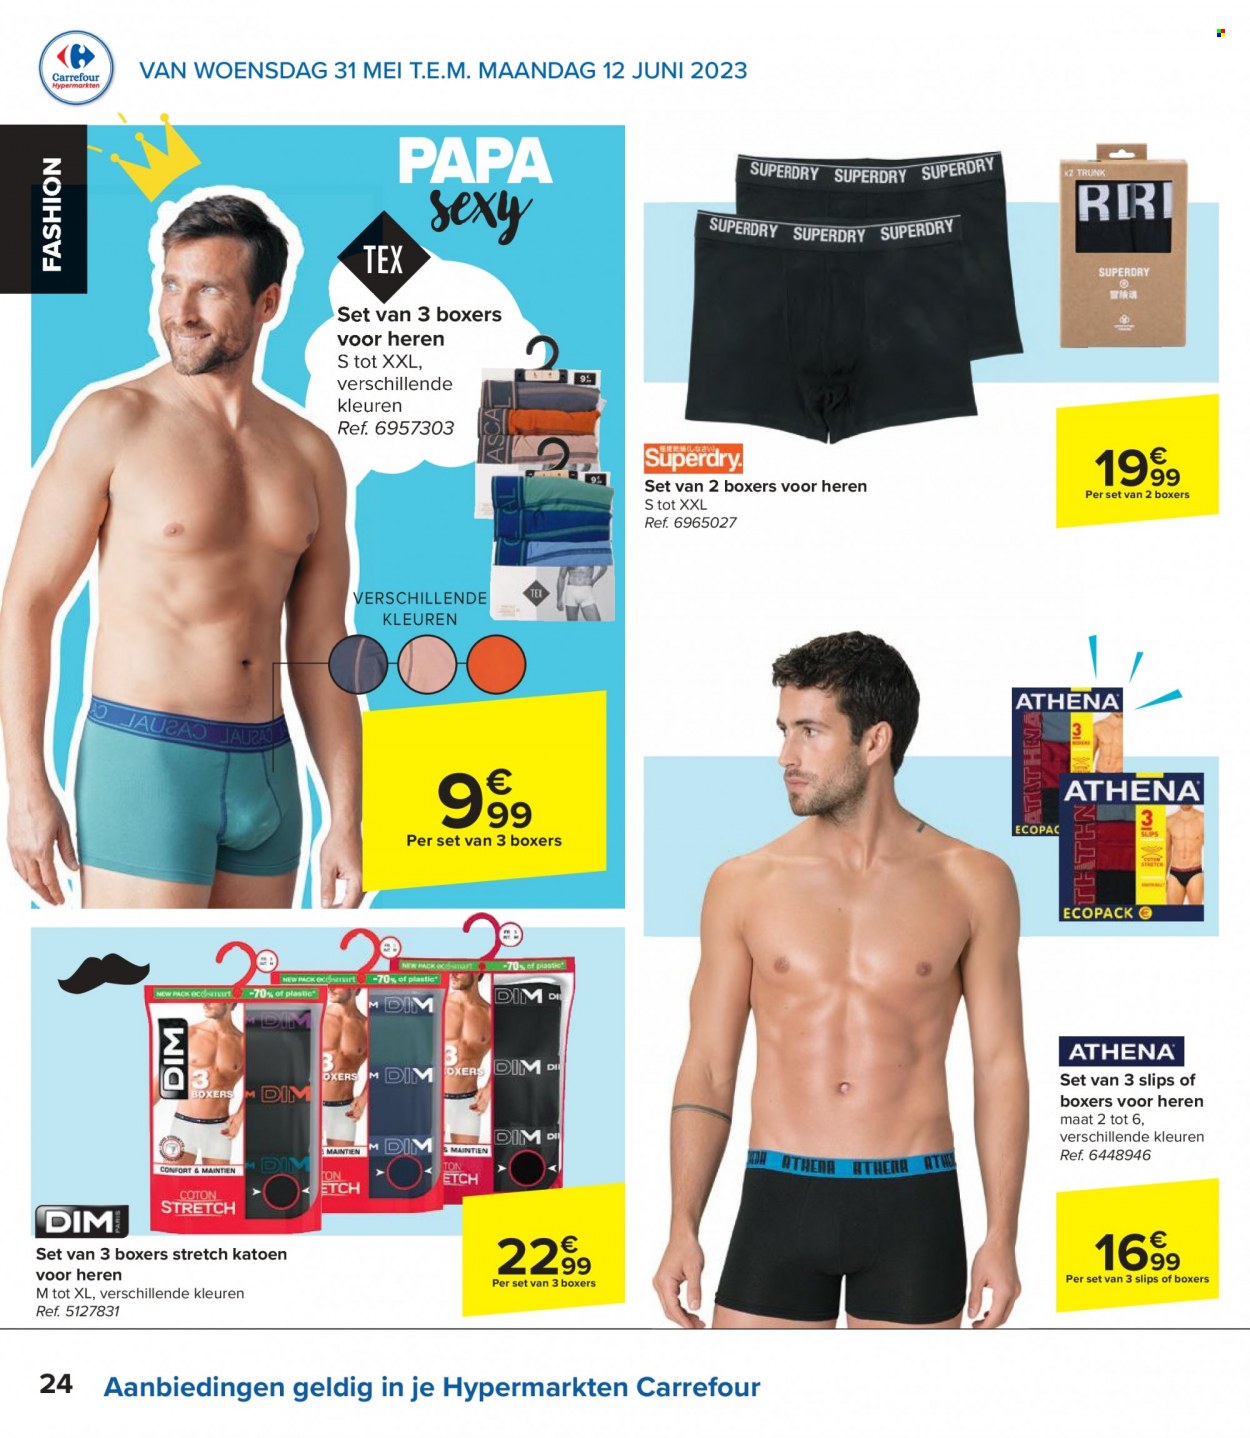 Catalogue Carrefour hypermarkt - 31.5.2023 - 12.6.2023. Page 24.